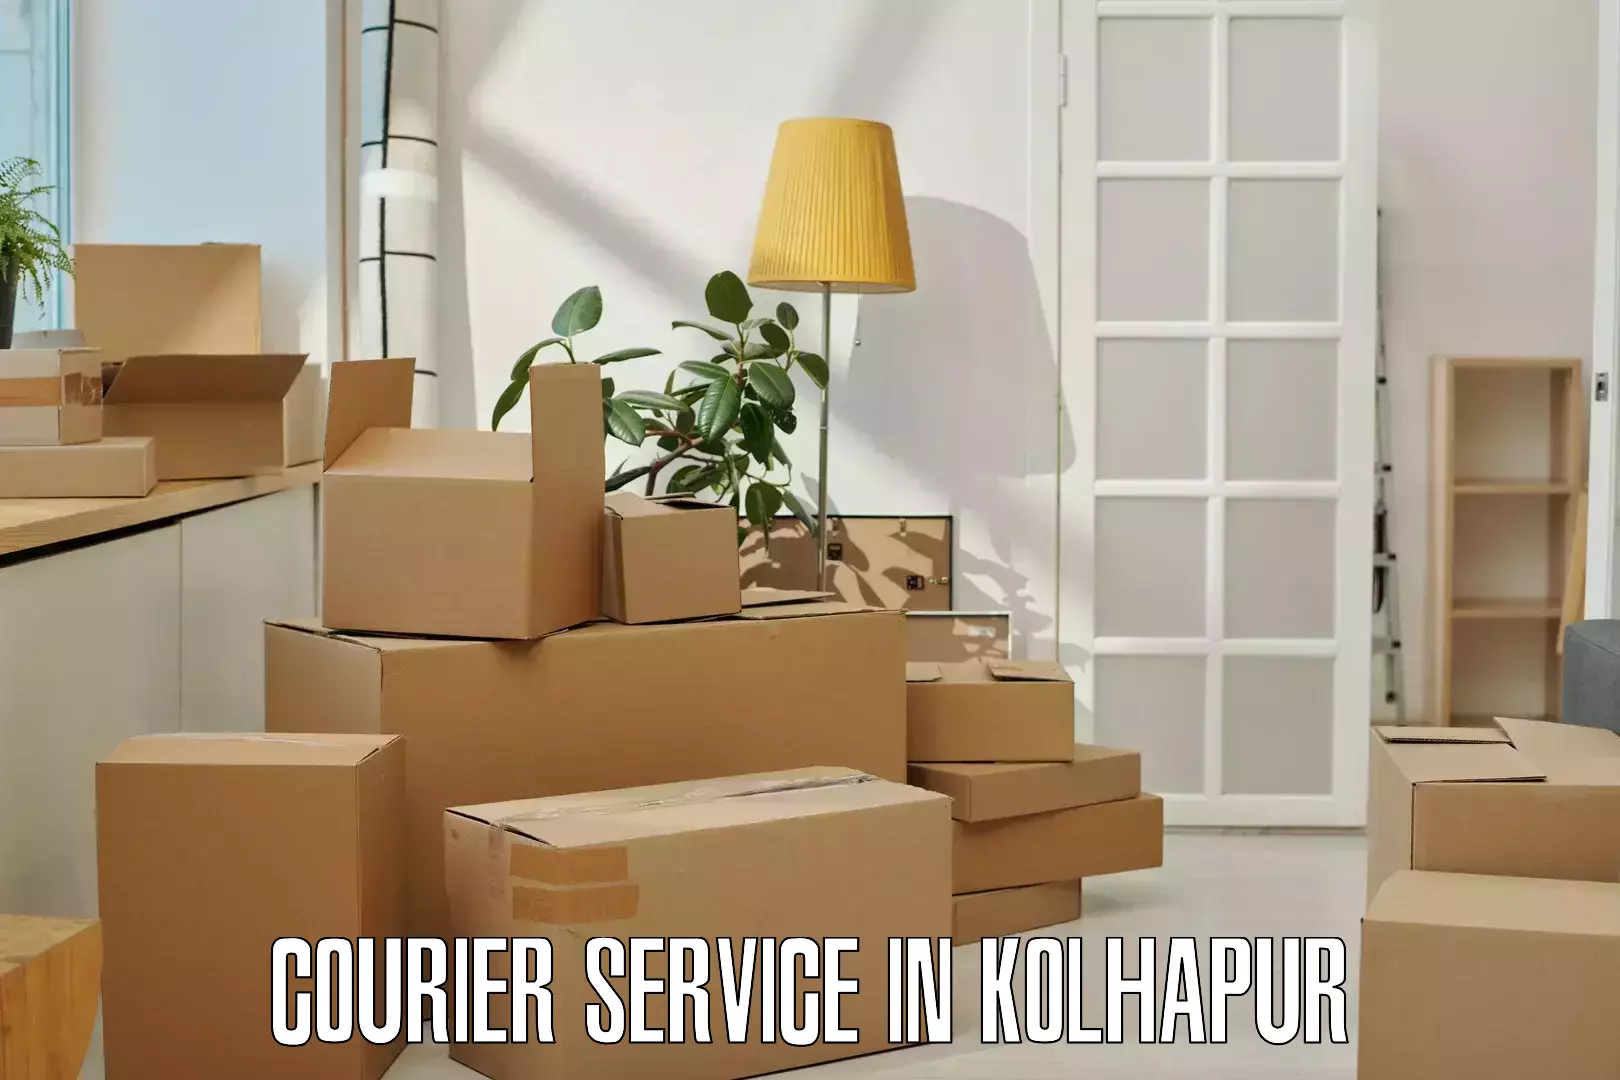 Rural area delivery in Kolhapur